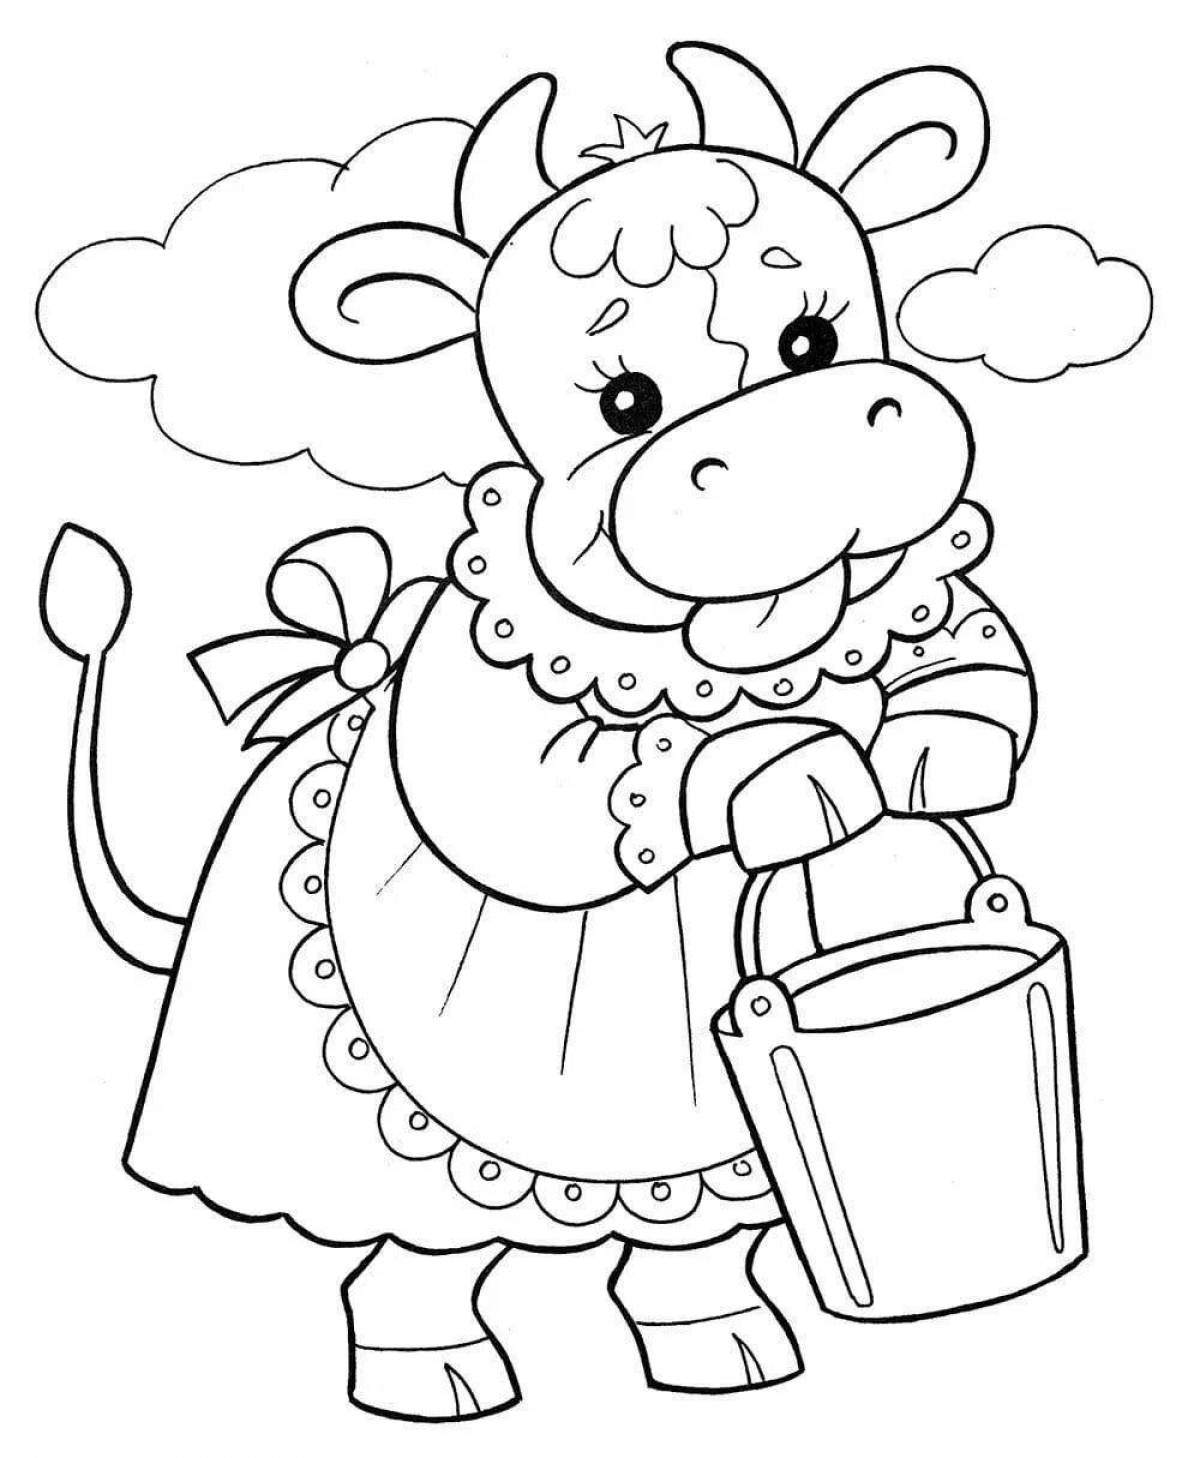 Live coloring cow for children 4-5 years old